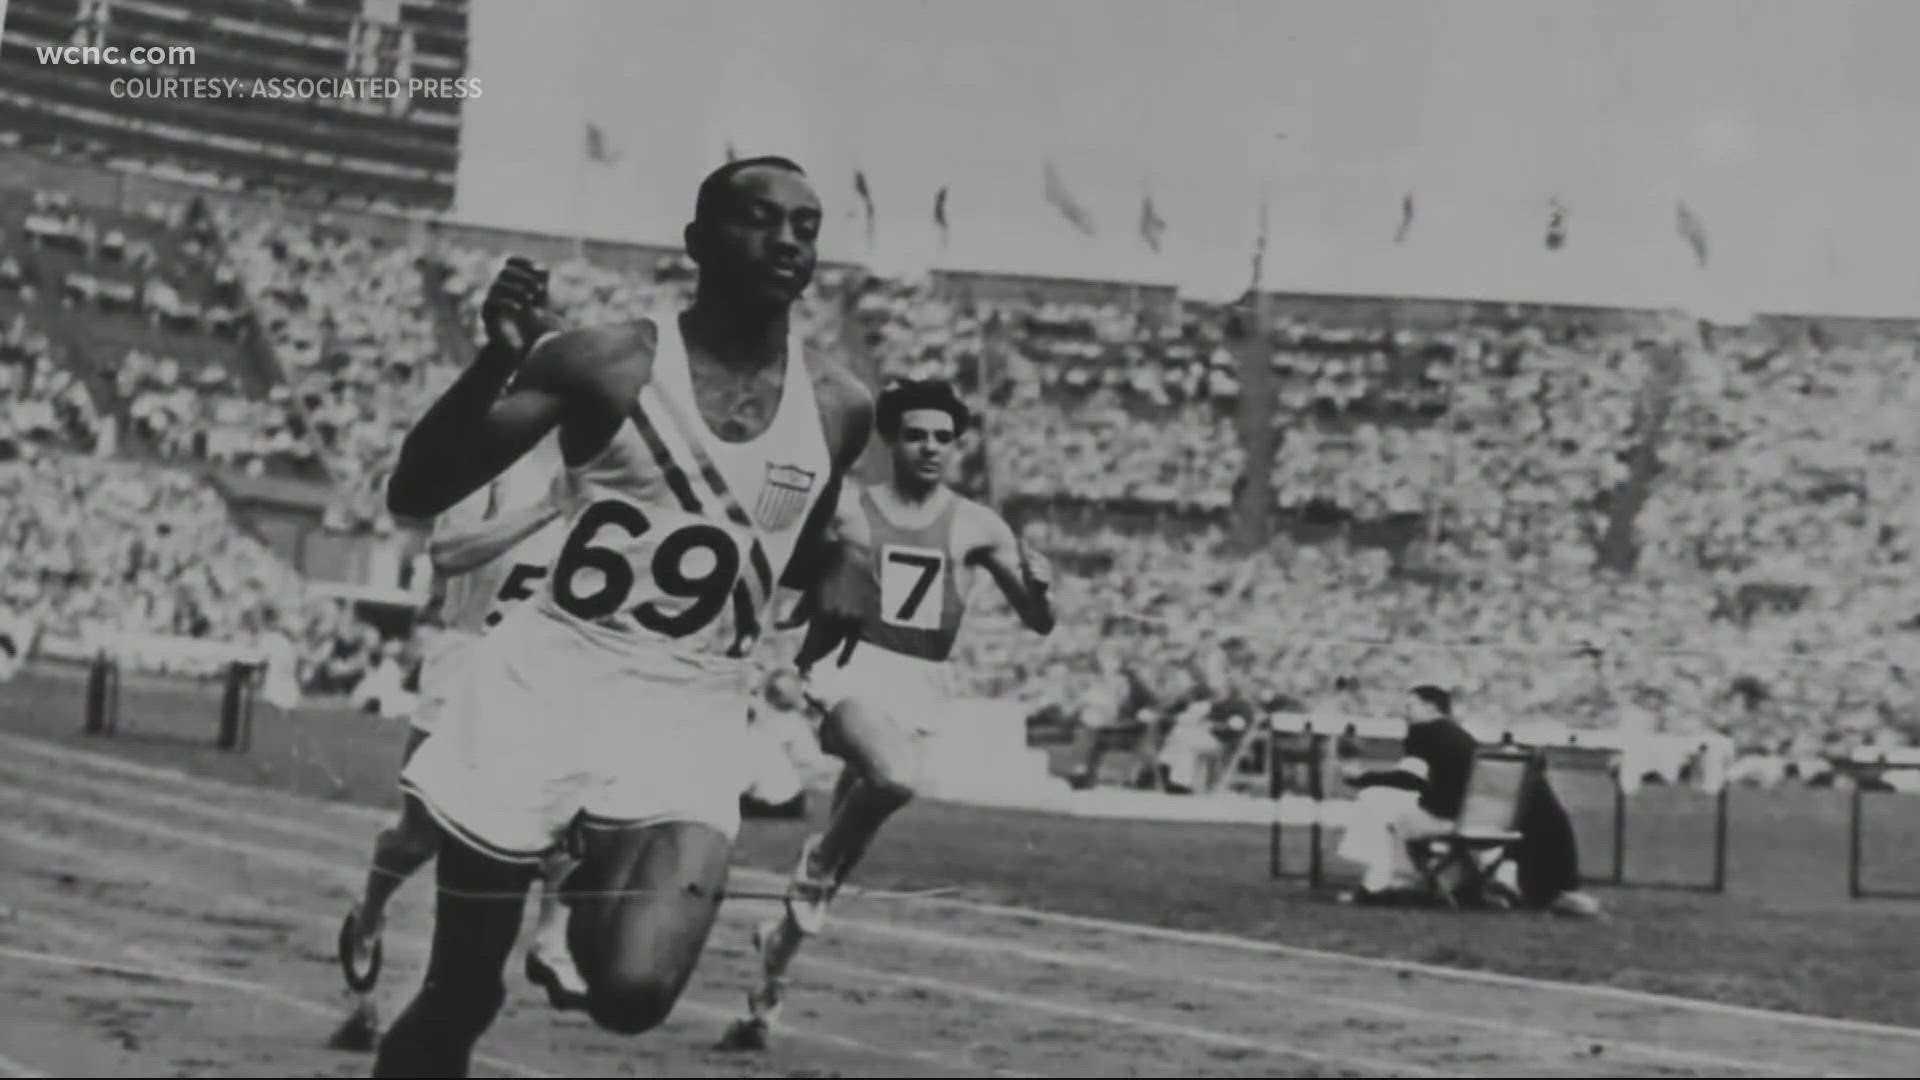 We take a look at how Harrison Dillard's spark was lit by Jesse Owens, and how it led to a first-ever photo finish at the Olympics.